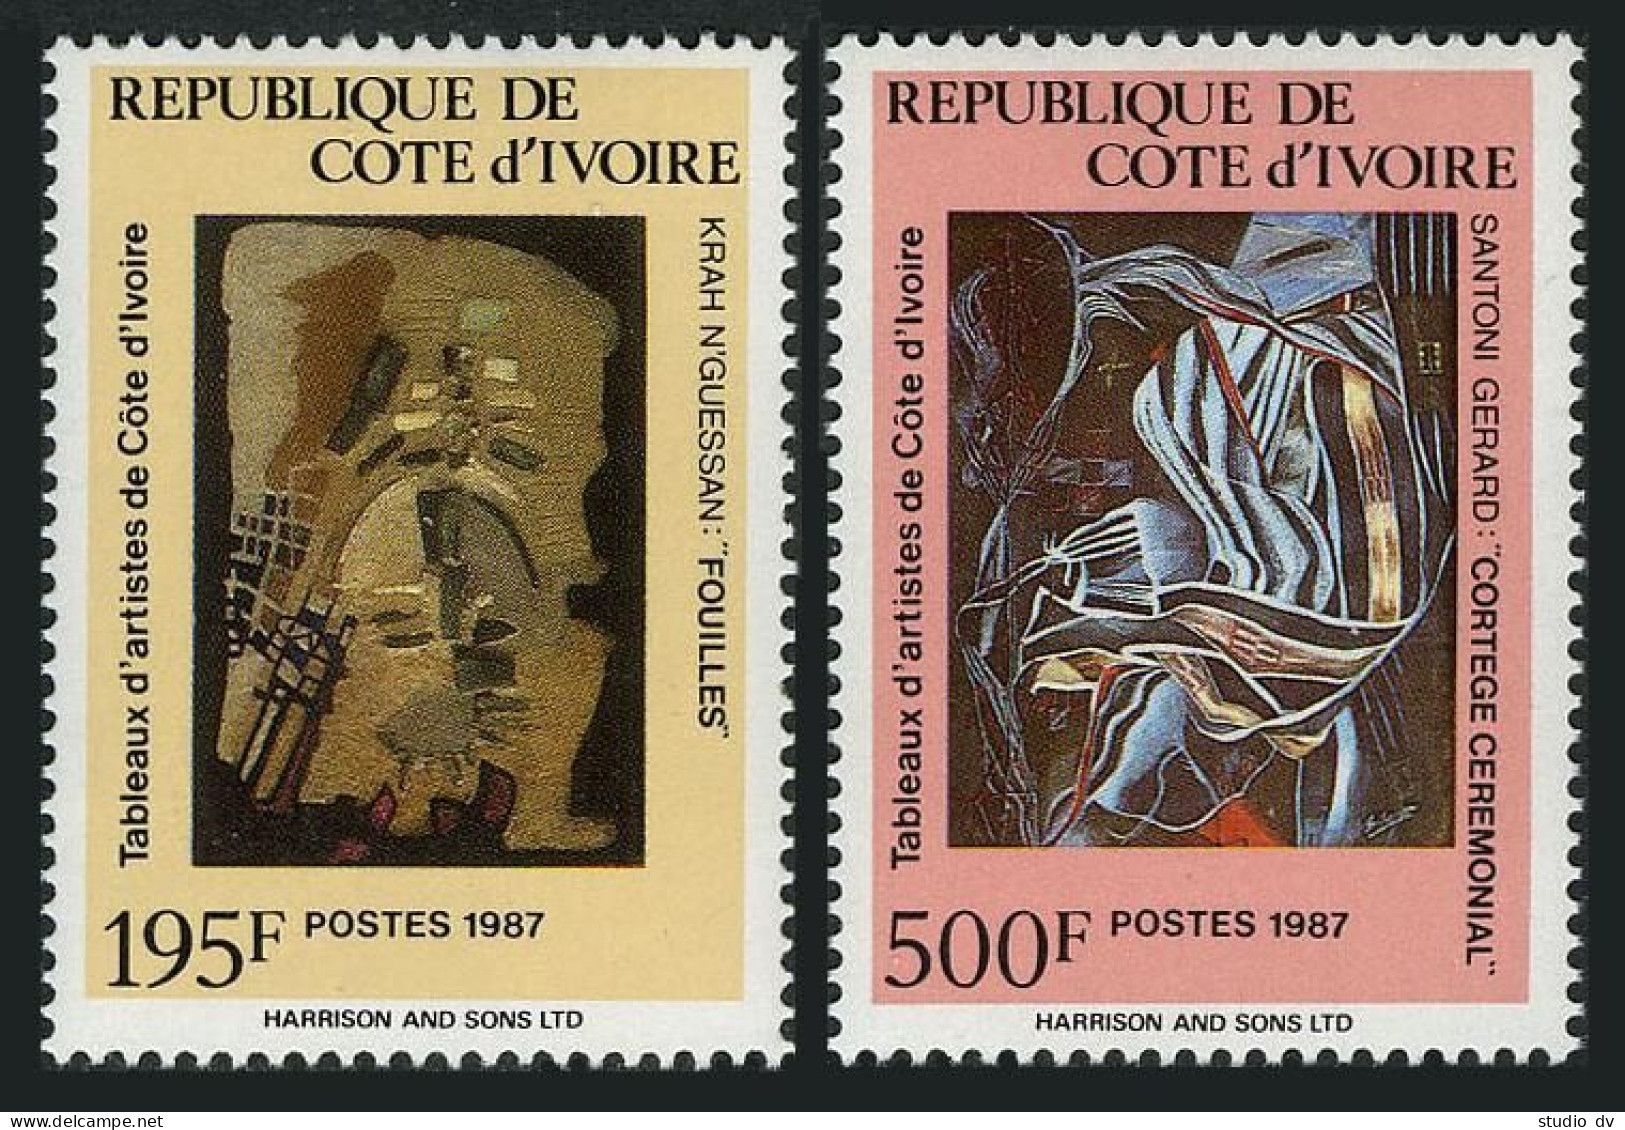 Ivory Coast 841-842,MNH.Mi 955-956. Paintings By Local Artists,1987. - Côte D'Ivoire (1960-...)